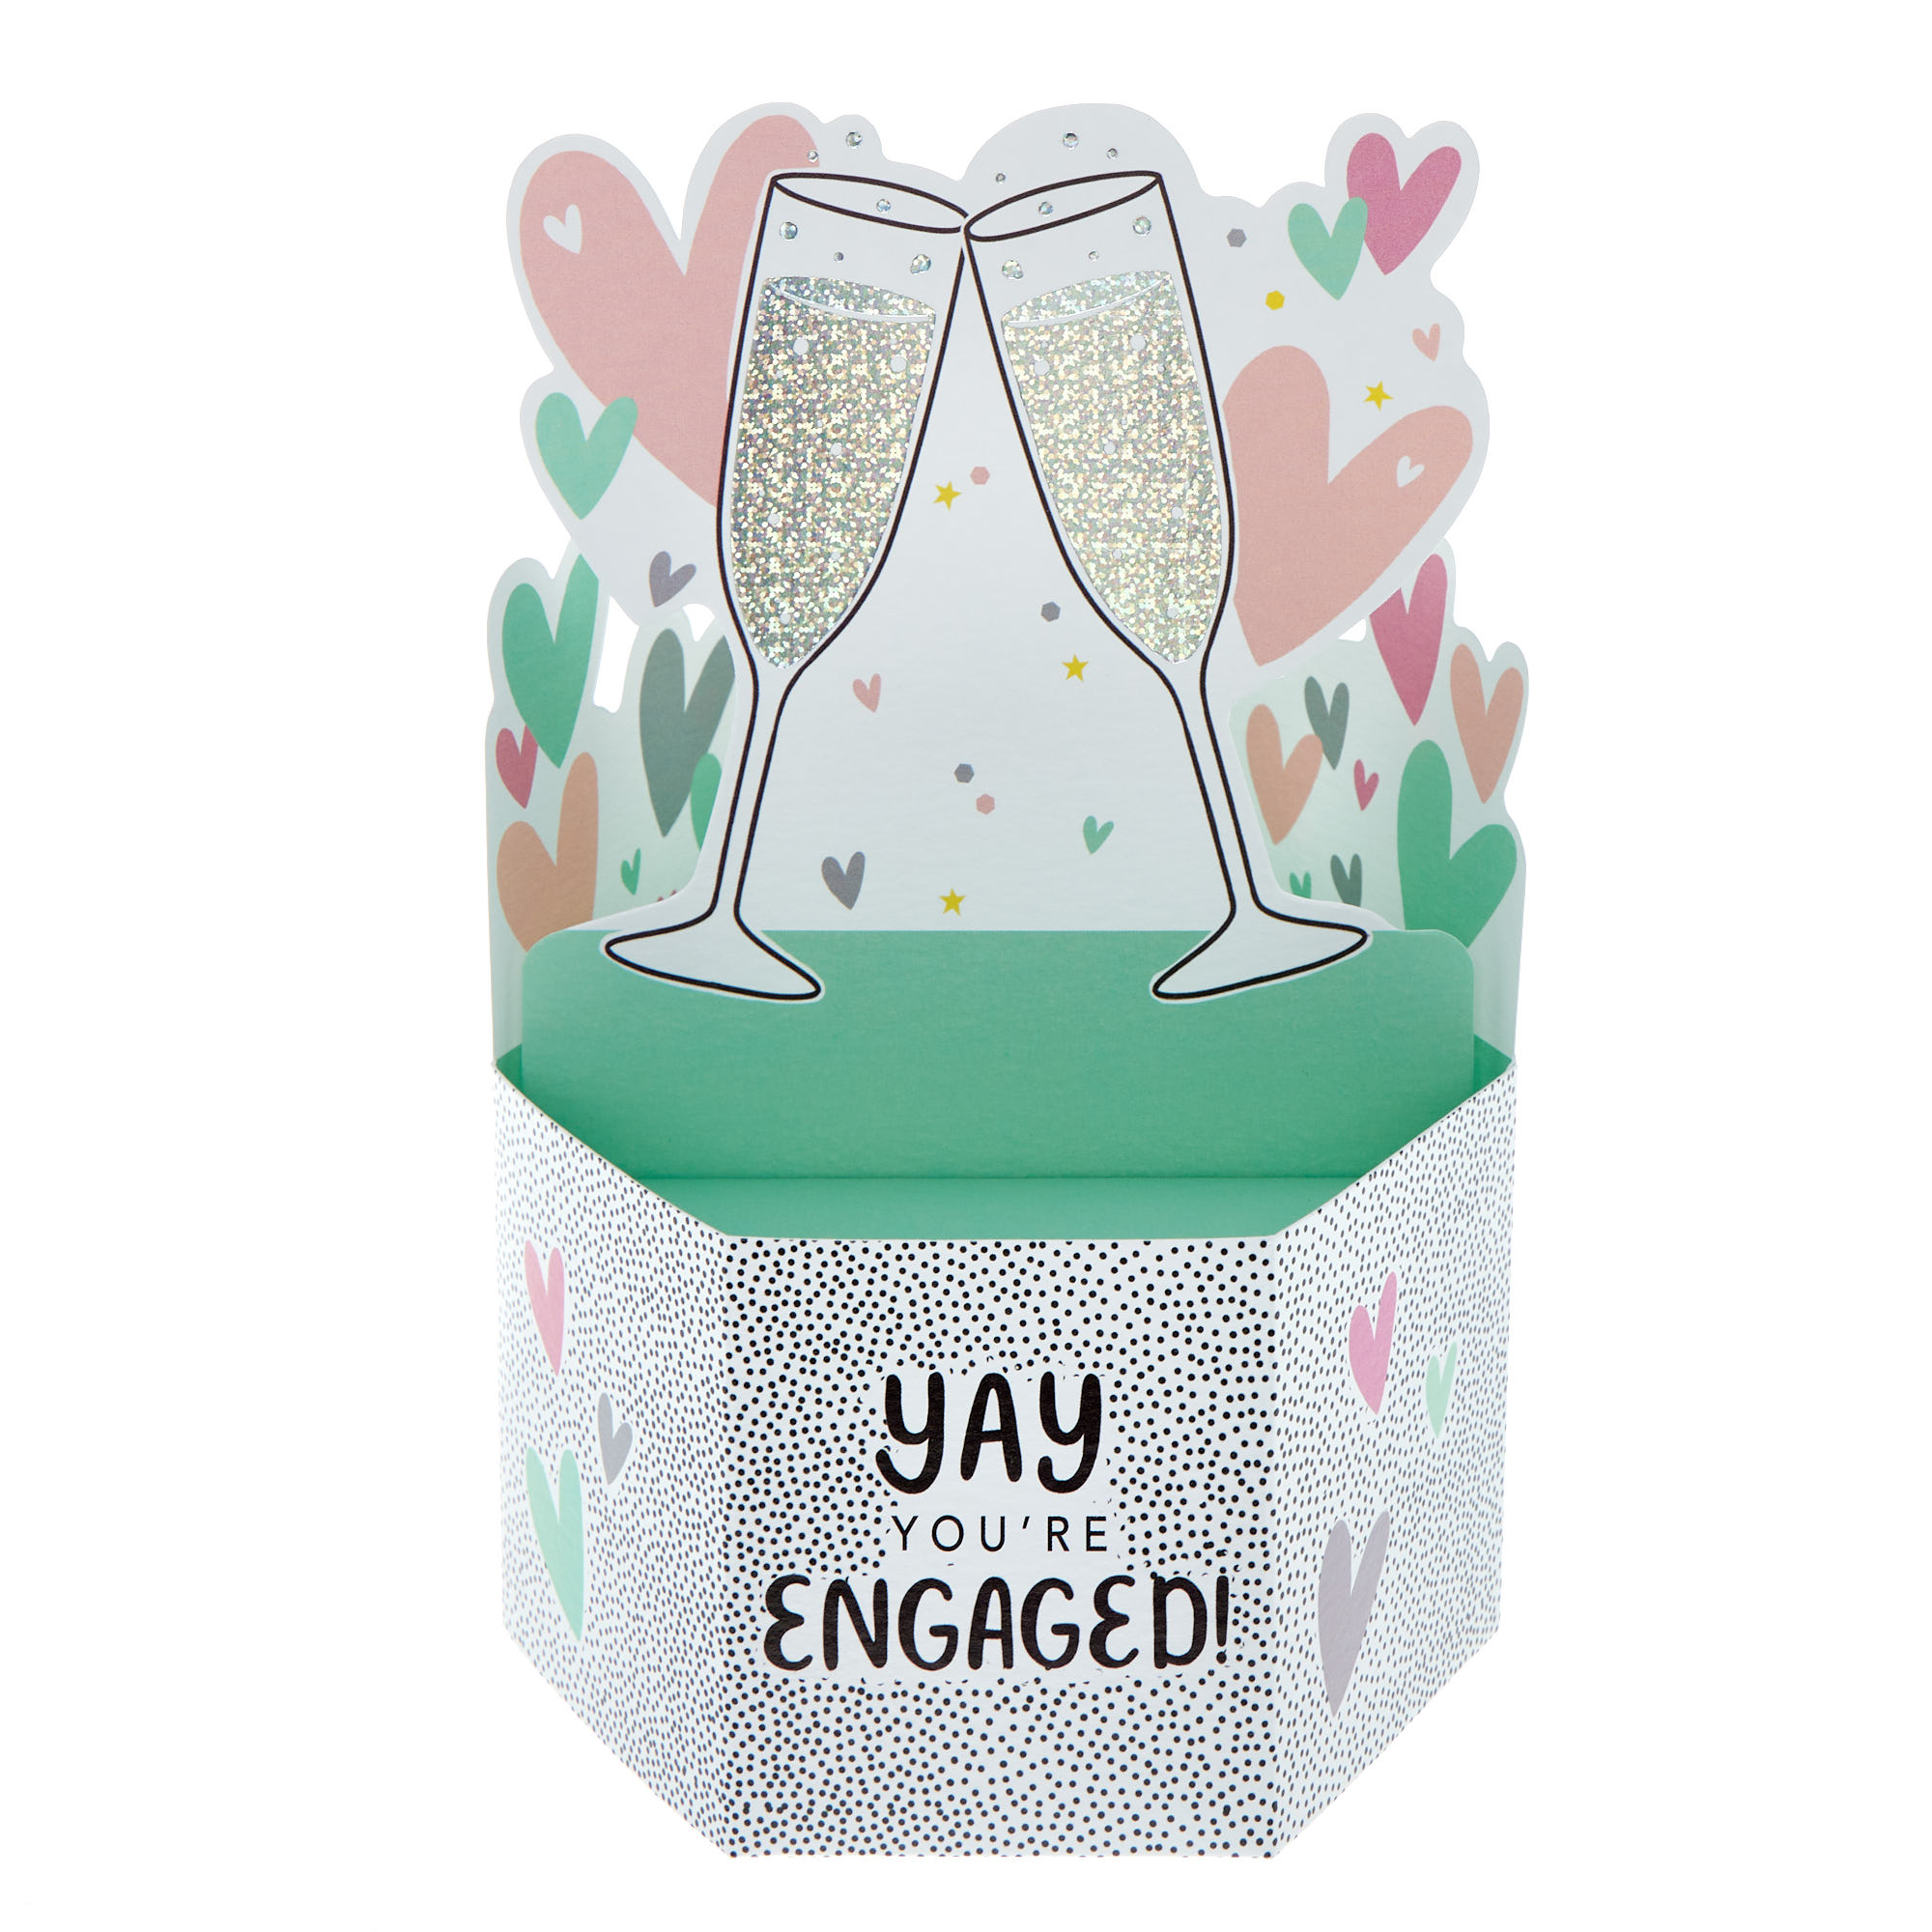 Yay You're Engaged Pop-Up Engagement Card